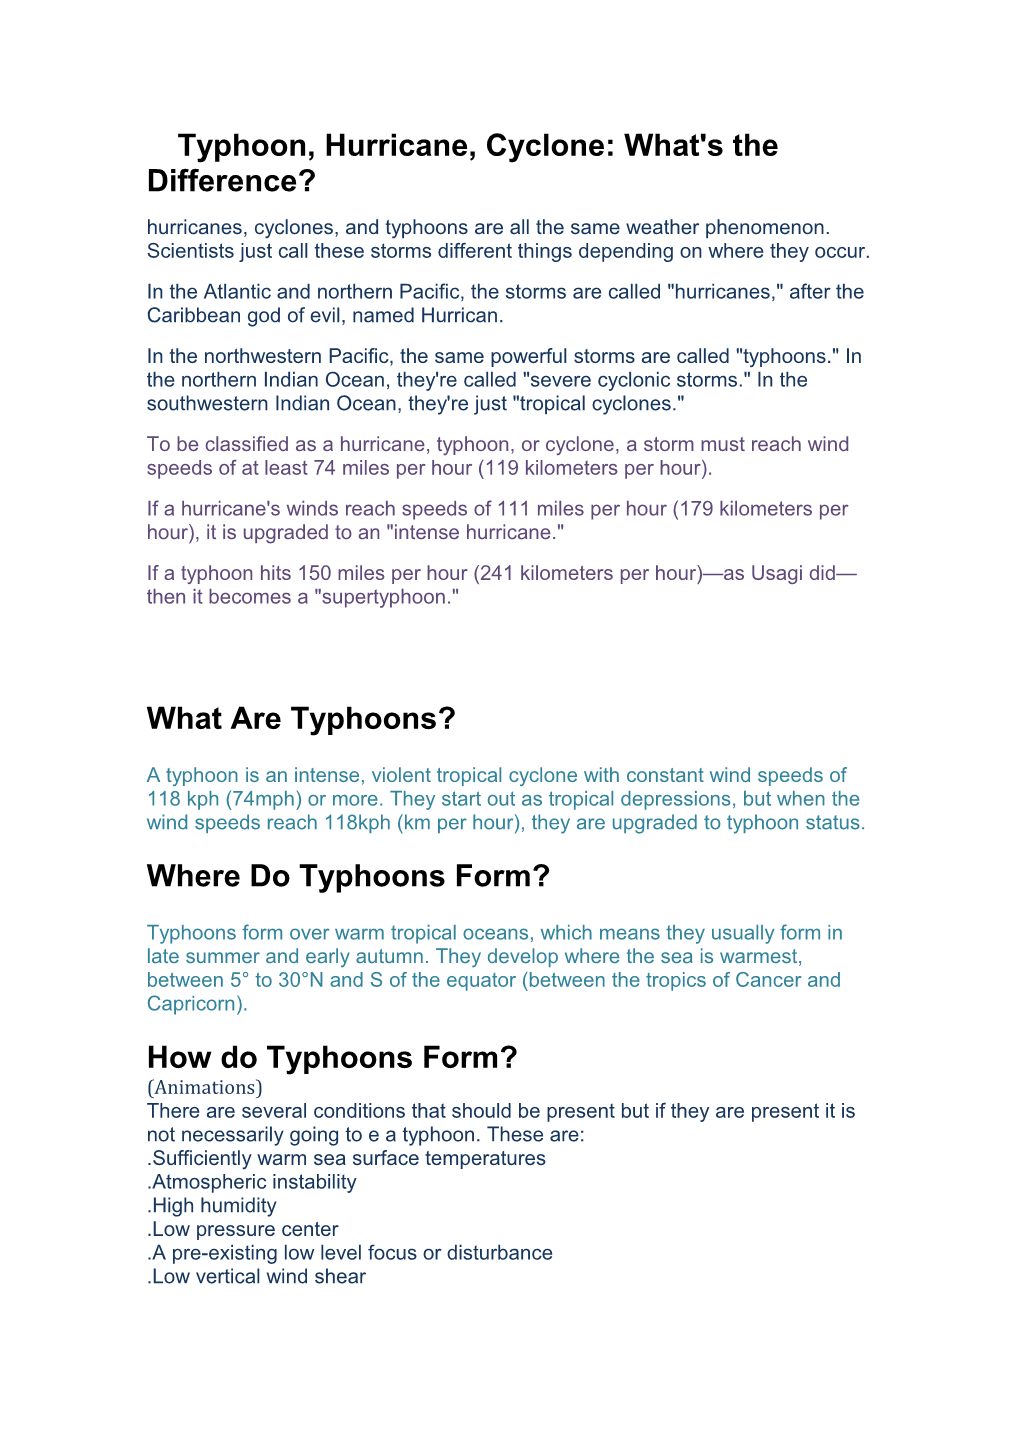 Typhoon, Hurricane, Cyclone: What's the Difference?